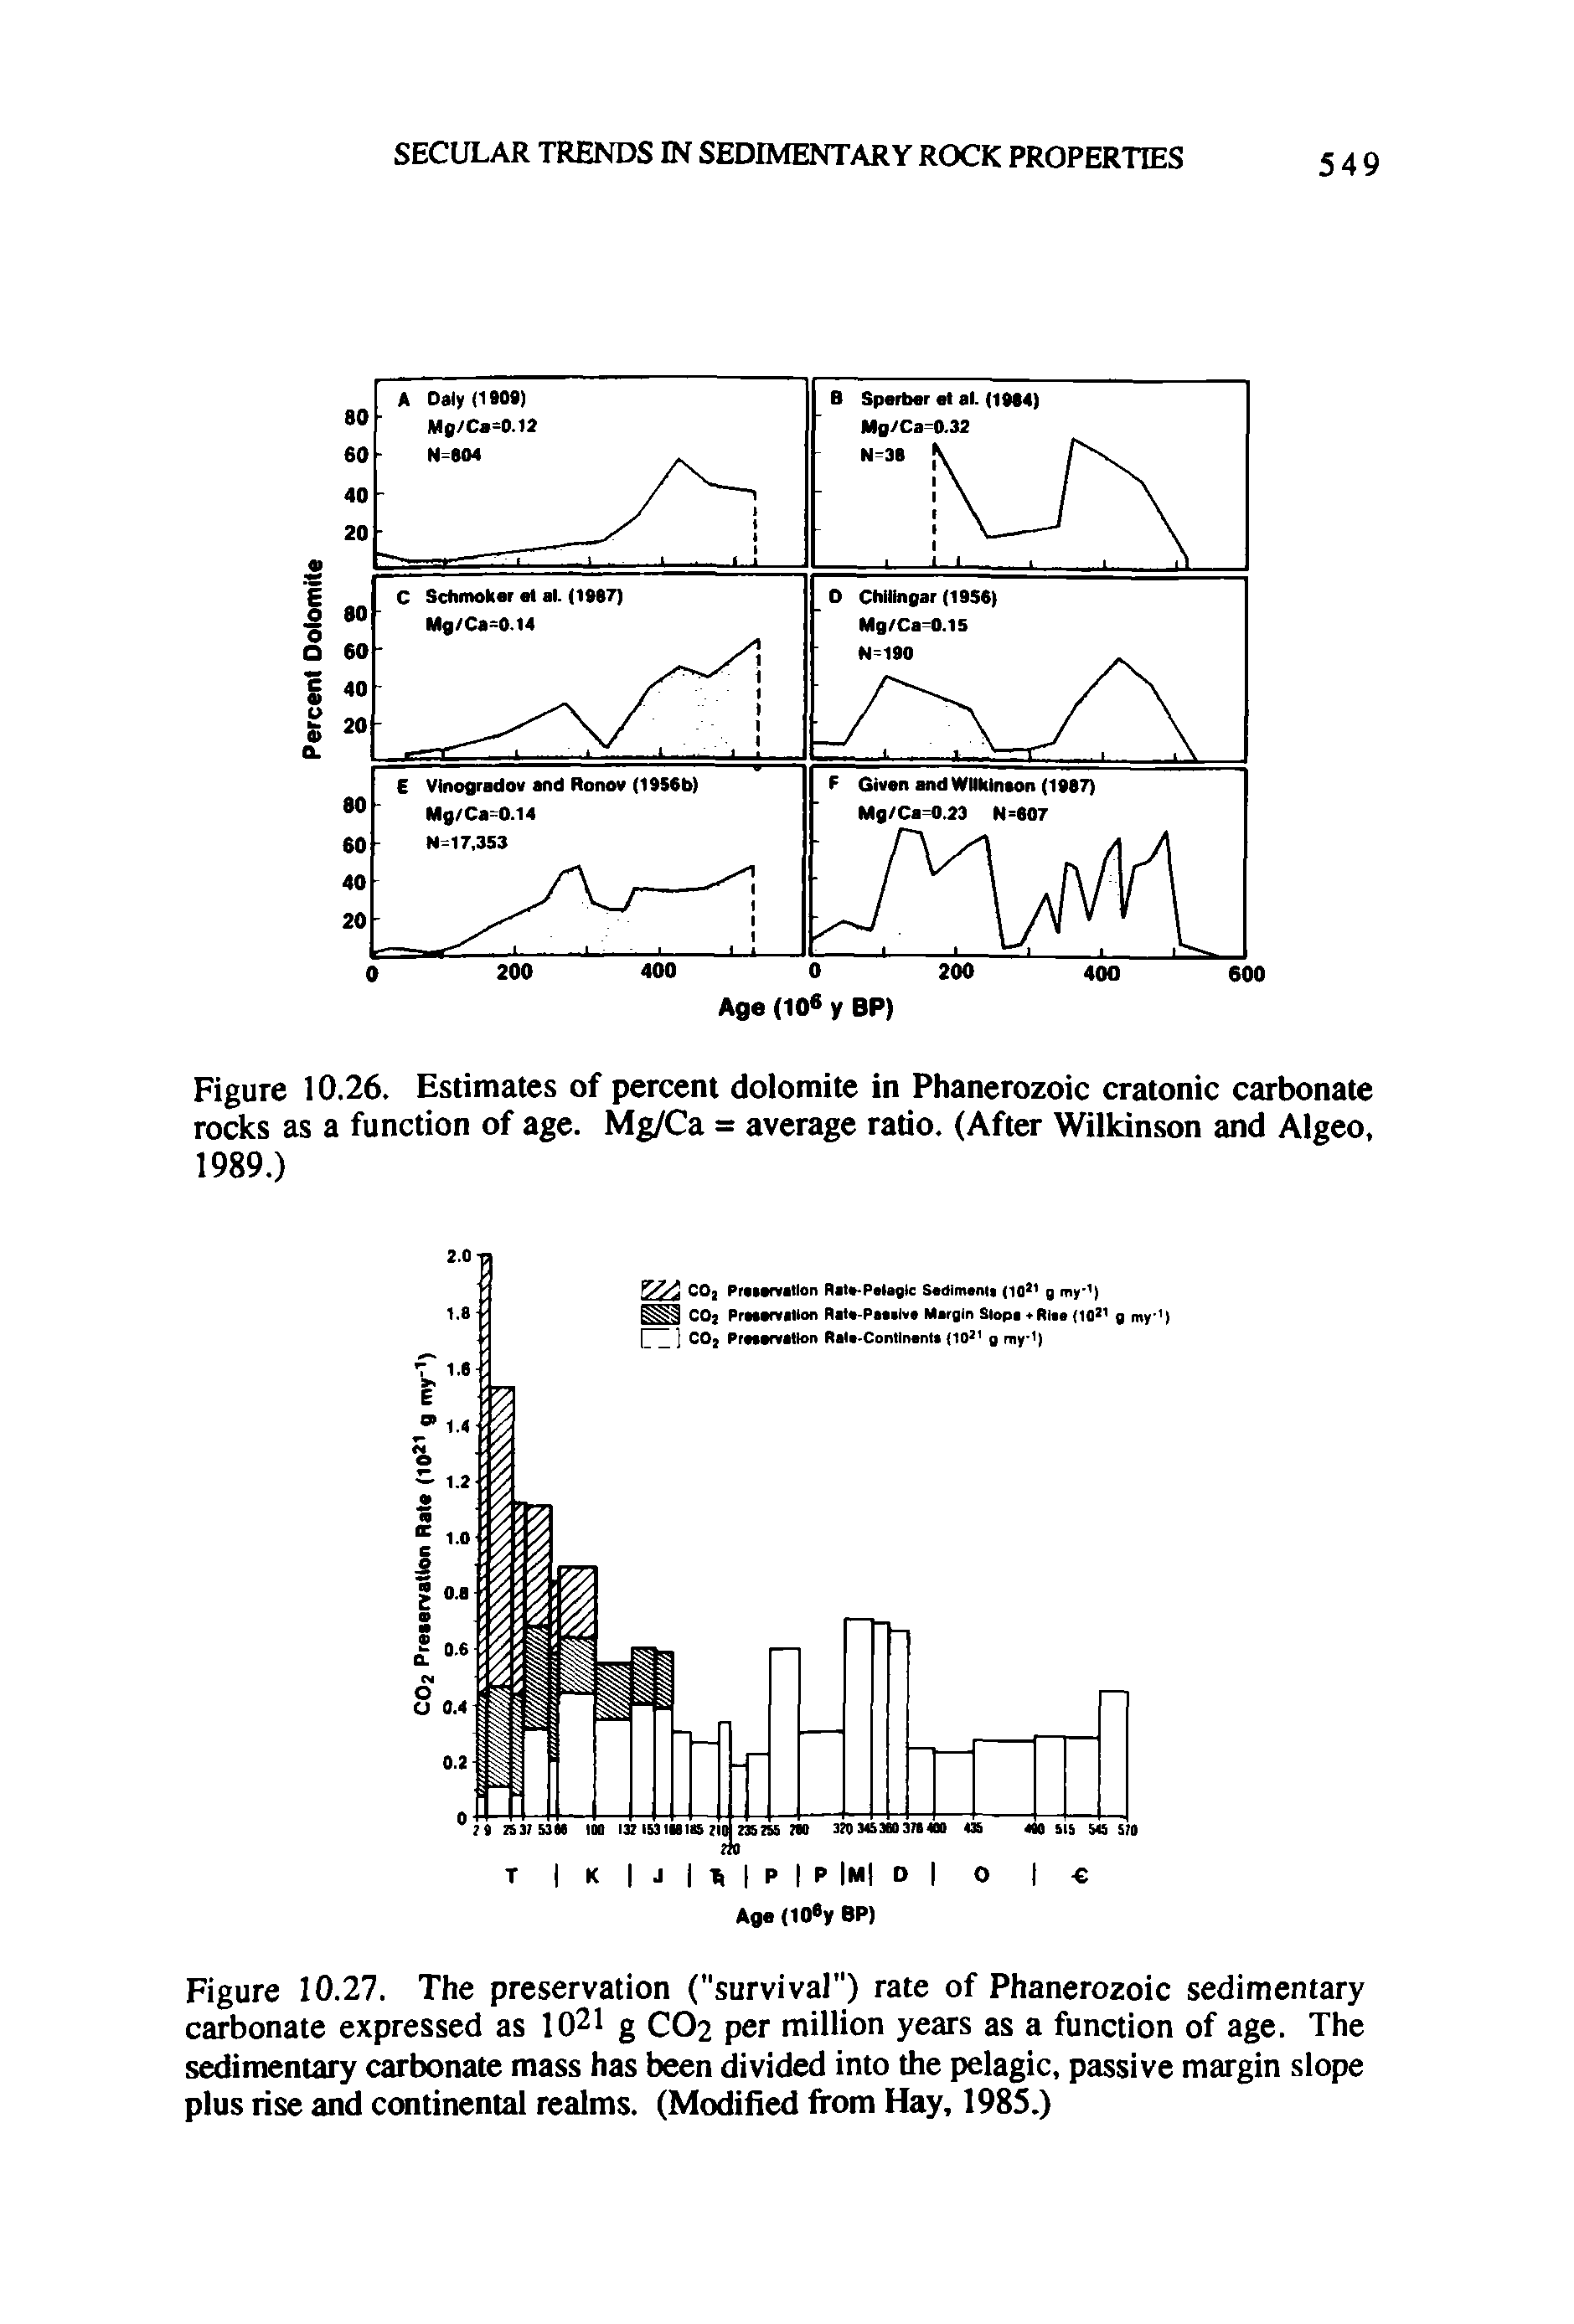 Figure 10.27. The preservation ("survival") rate of Phanerozoic sedimentary carbonate expressed as 1021 g CO2 per million years as a function of age. The sedimentary carbonate mass has been divided into the pelagic, passive margin slope plus rise and continental realms. (Modified from Hay, 1985.)...